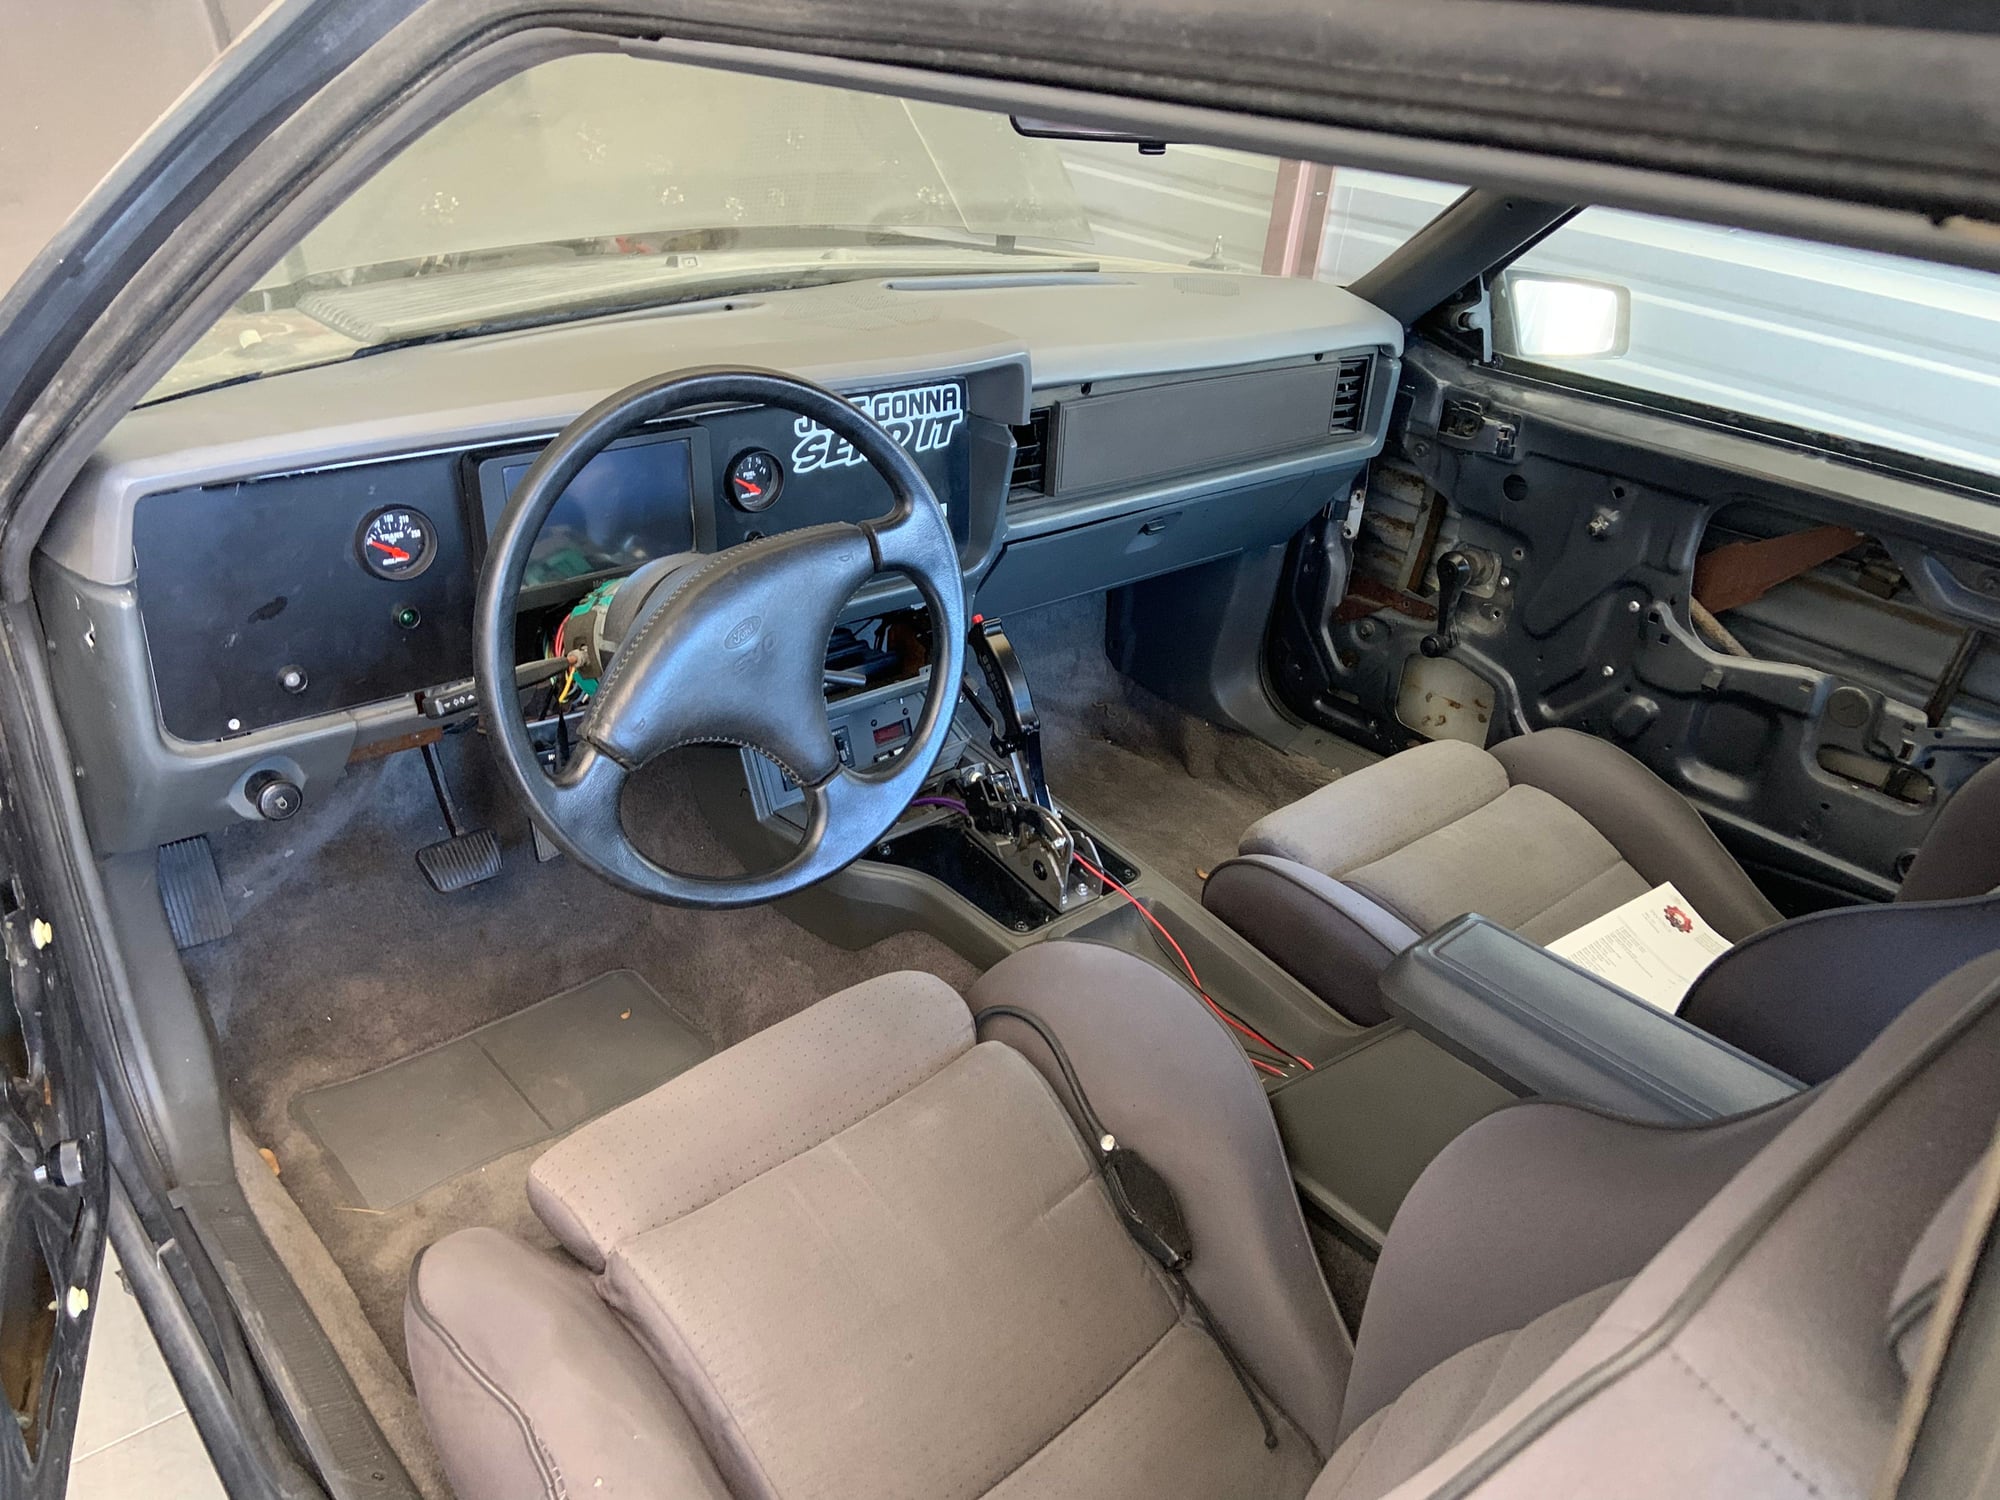 1984 Ford Mustang - 1984 mustang SVO LS swap - Used - VIN 1FABP28T7EF175726 - 1,111,111 Miles - 8 cyl - 2WD - Manual - Hatchback - Gray - Mishawaka, IN 46561, United States